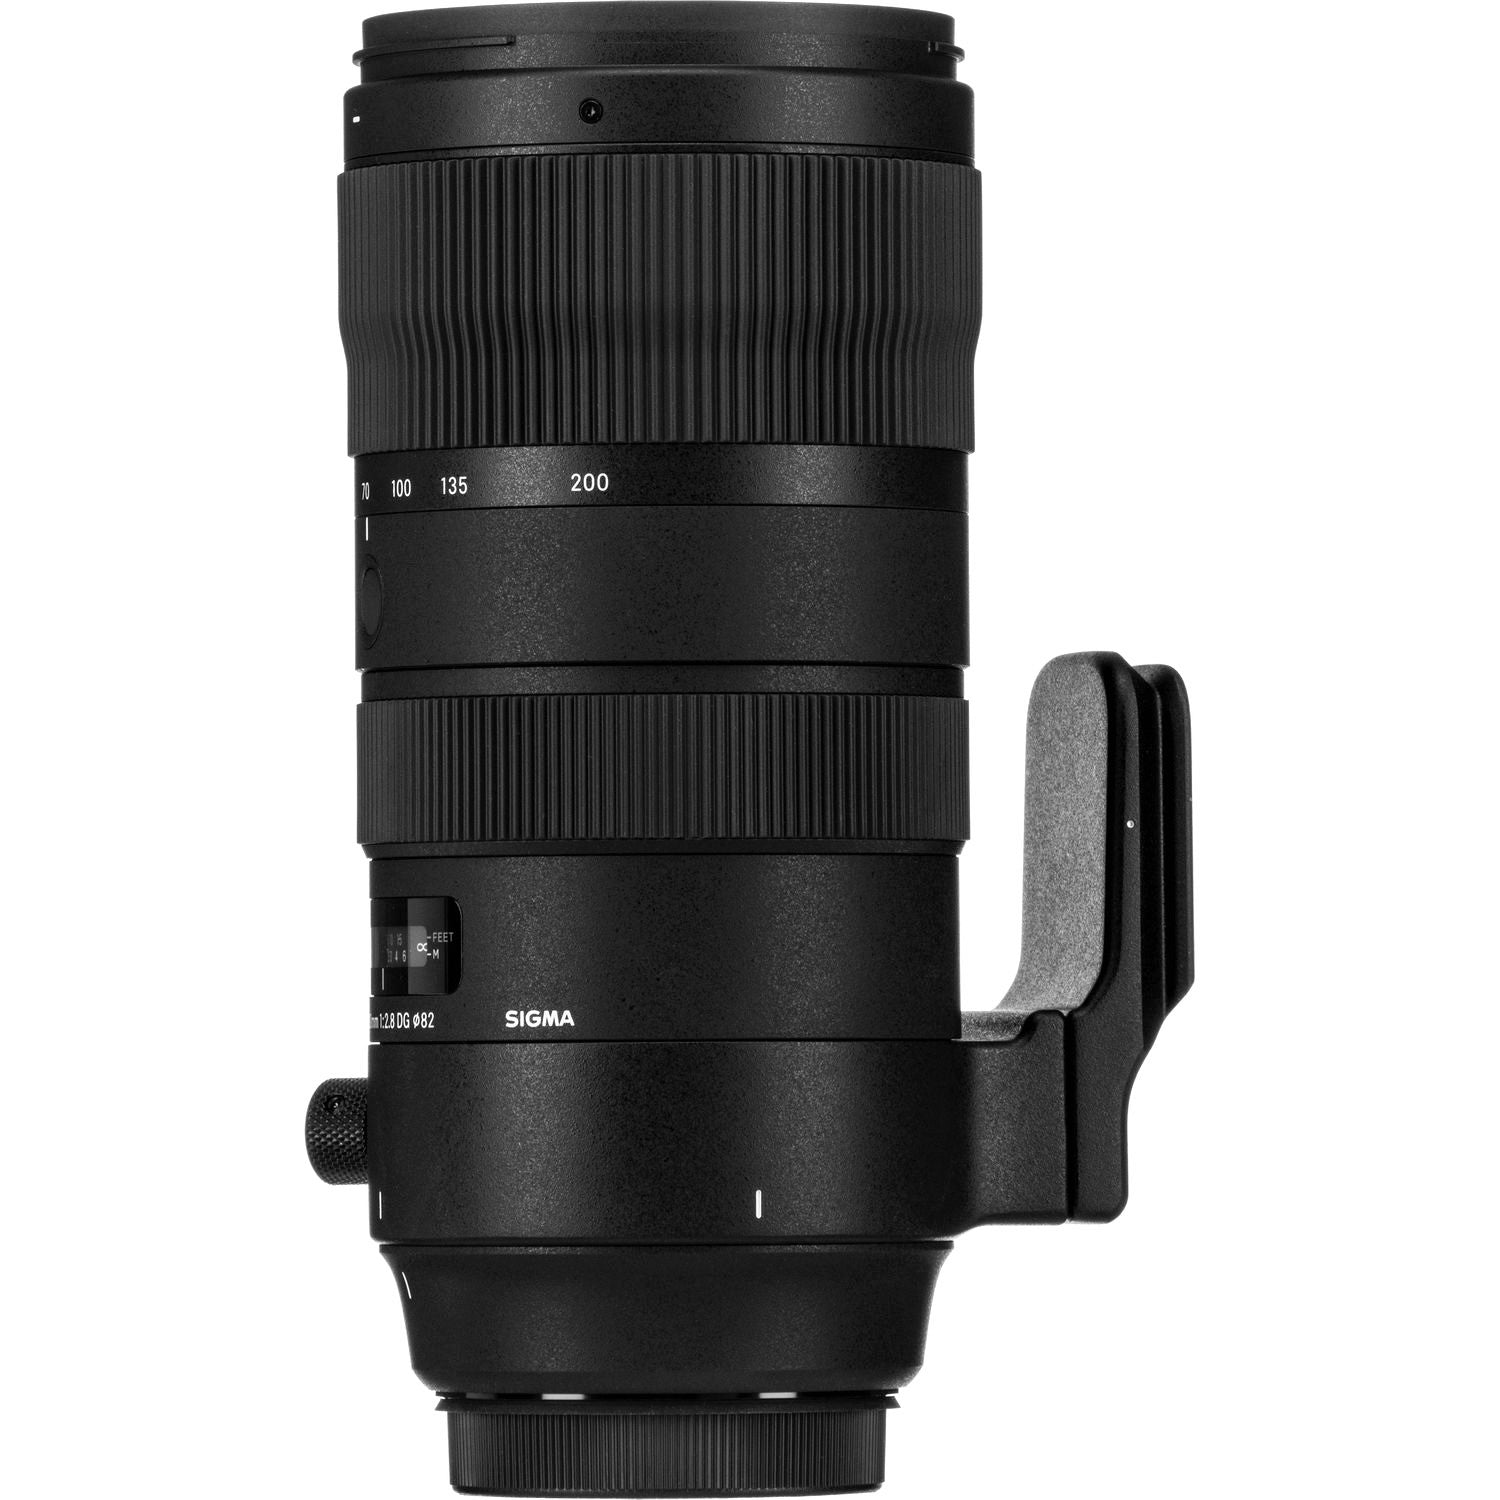 Sigma 70-200mm F2.8 DG OS HSM Sports Lens (Canon EF Mount) with Attached Tripod Socket on the Right Side